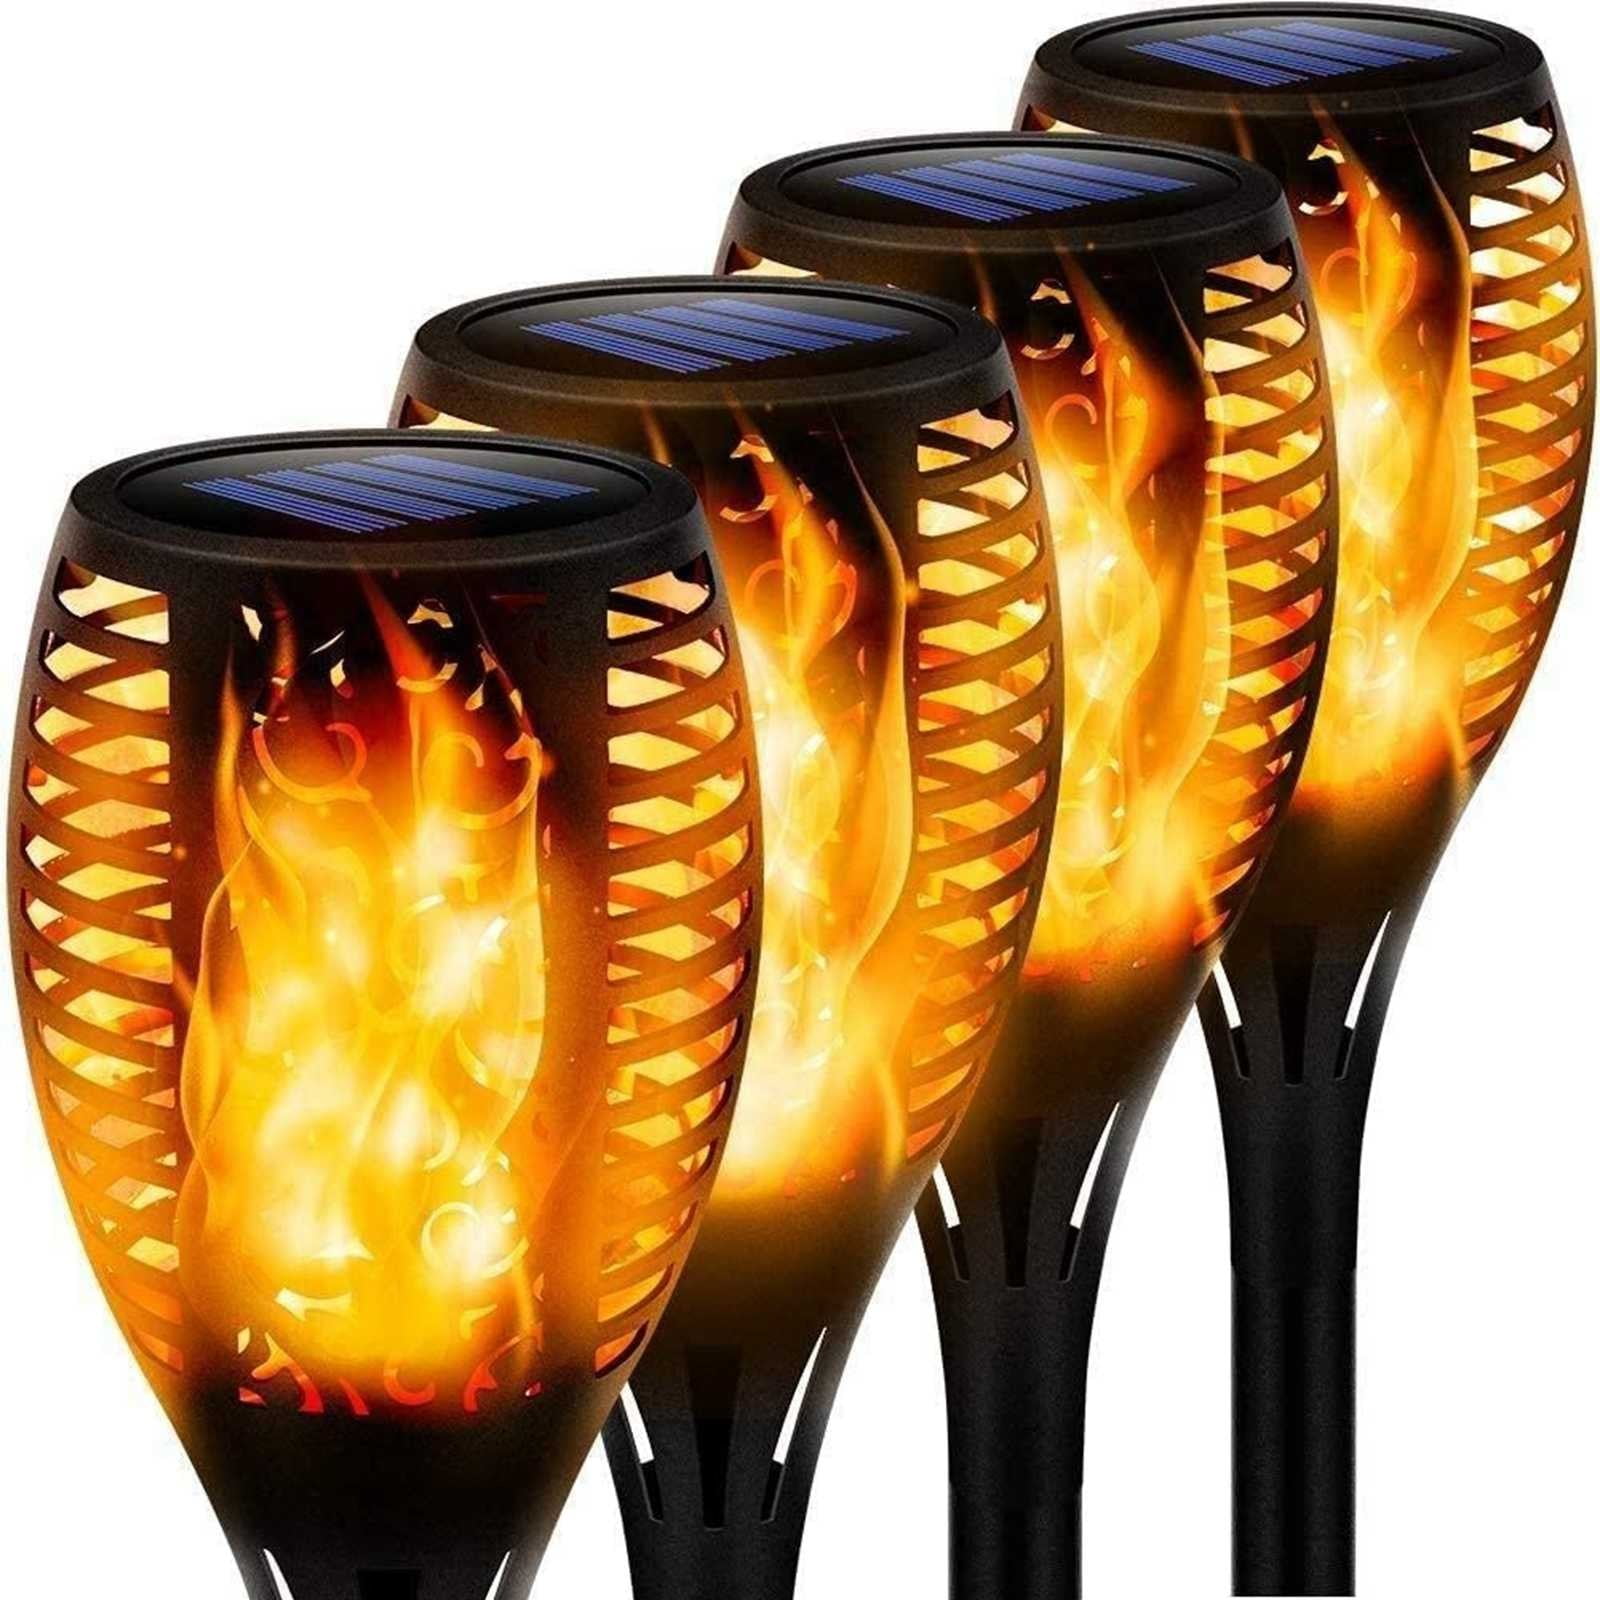 Outdoor LED Solar Flame Torch Light Flickering Flame Dancing Effect Garden Lamp 